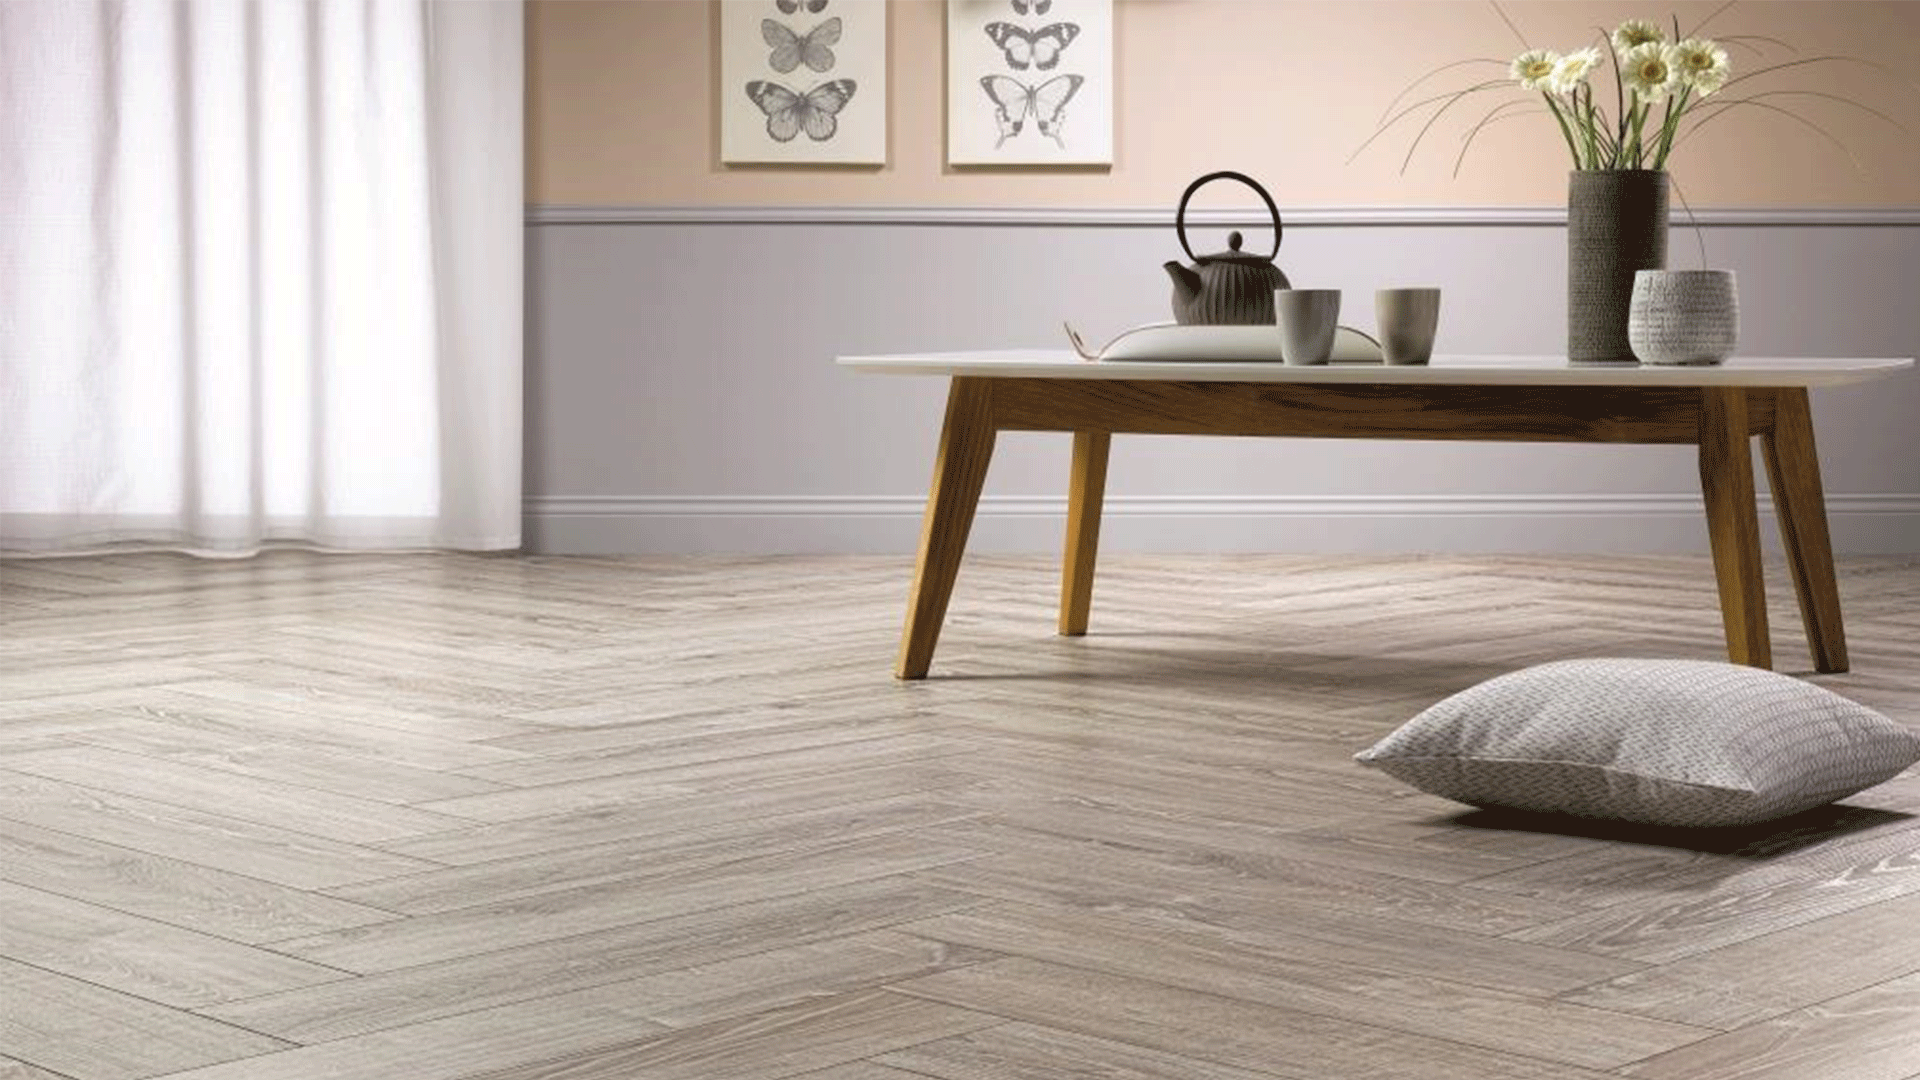 Floors launches the Laminate Herringbone collection - Architect and India